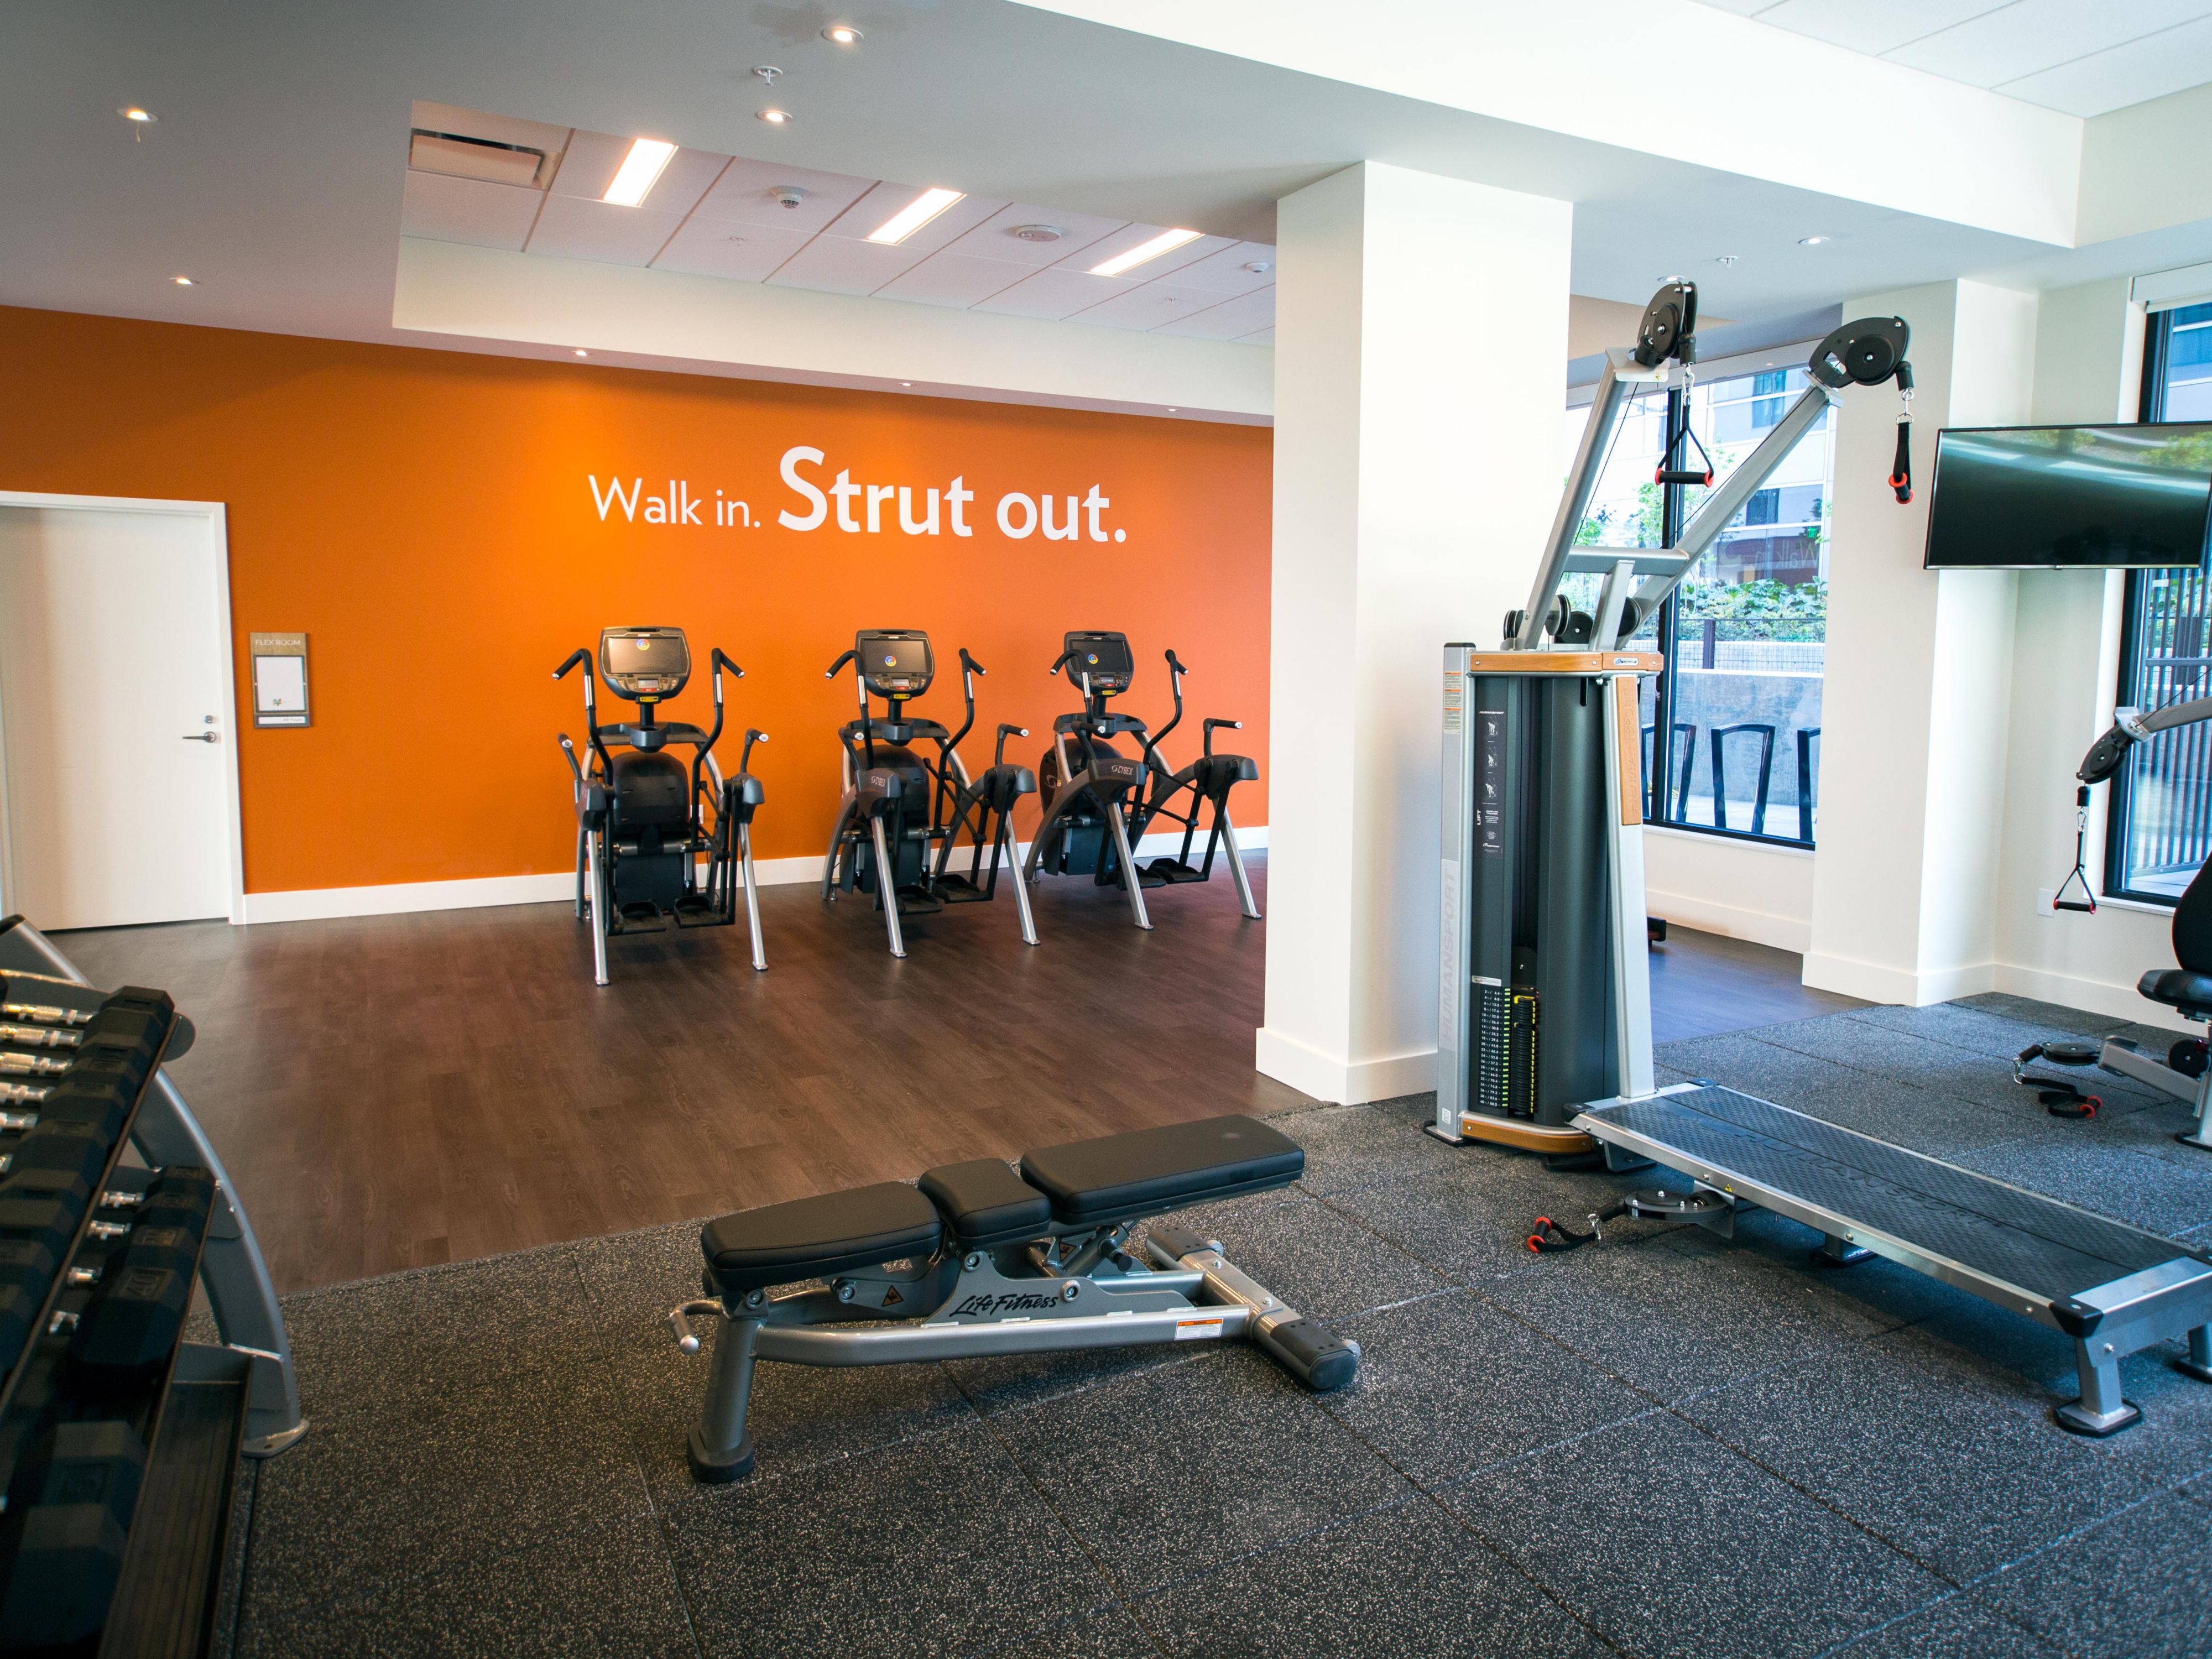 Access our 24/7 onsite gym to stay on top of your fitness routine no matter the time of day. Our best-in-class studio features fitness equipment needed for endurance, strength, flexibility, and balance workouts. After you complete your daily workout, recharge with a smoothie from the onsite restaurant, Cork and Kale.​